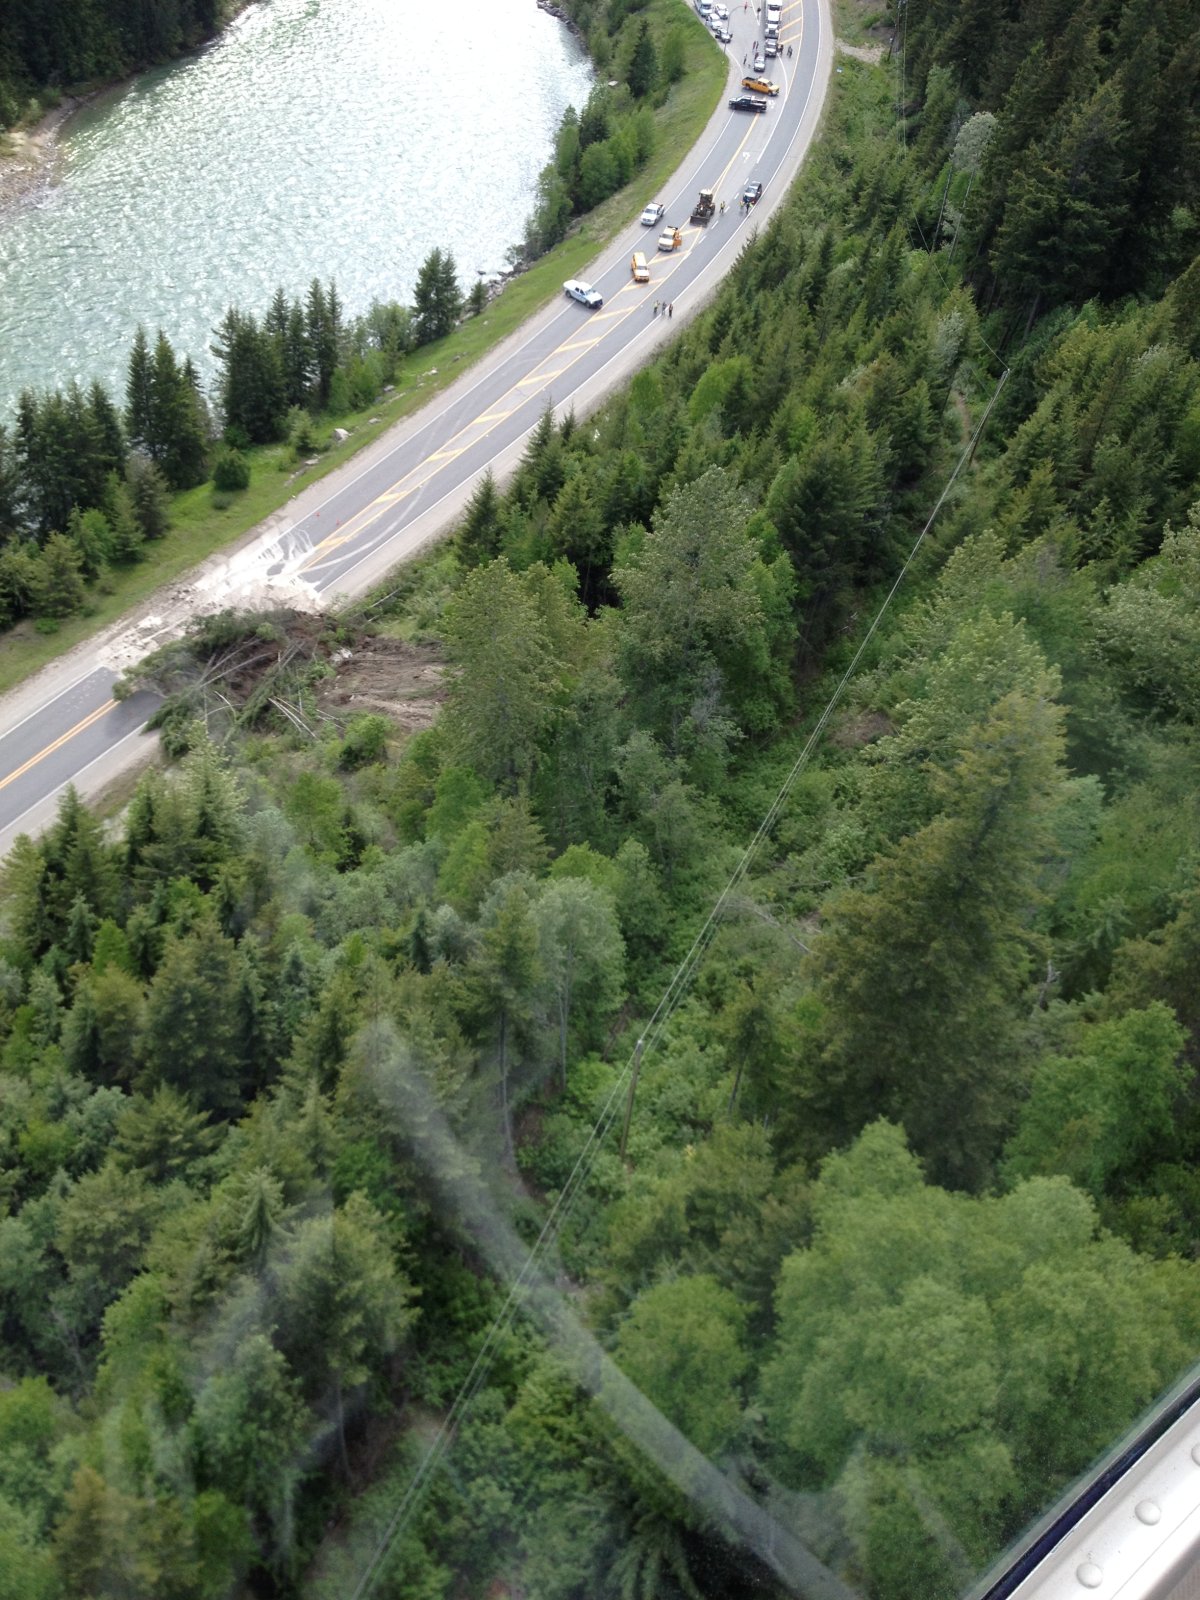 The first mudslide that occurred on Highway 16 near Tete Jaune Cache. June 7, 2014.